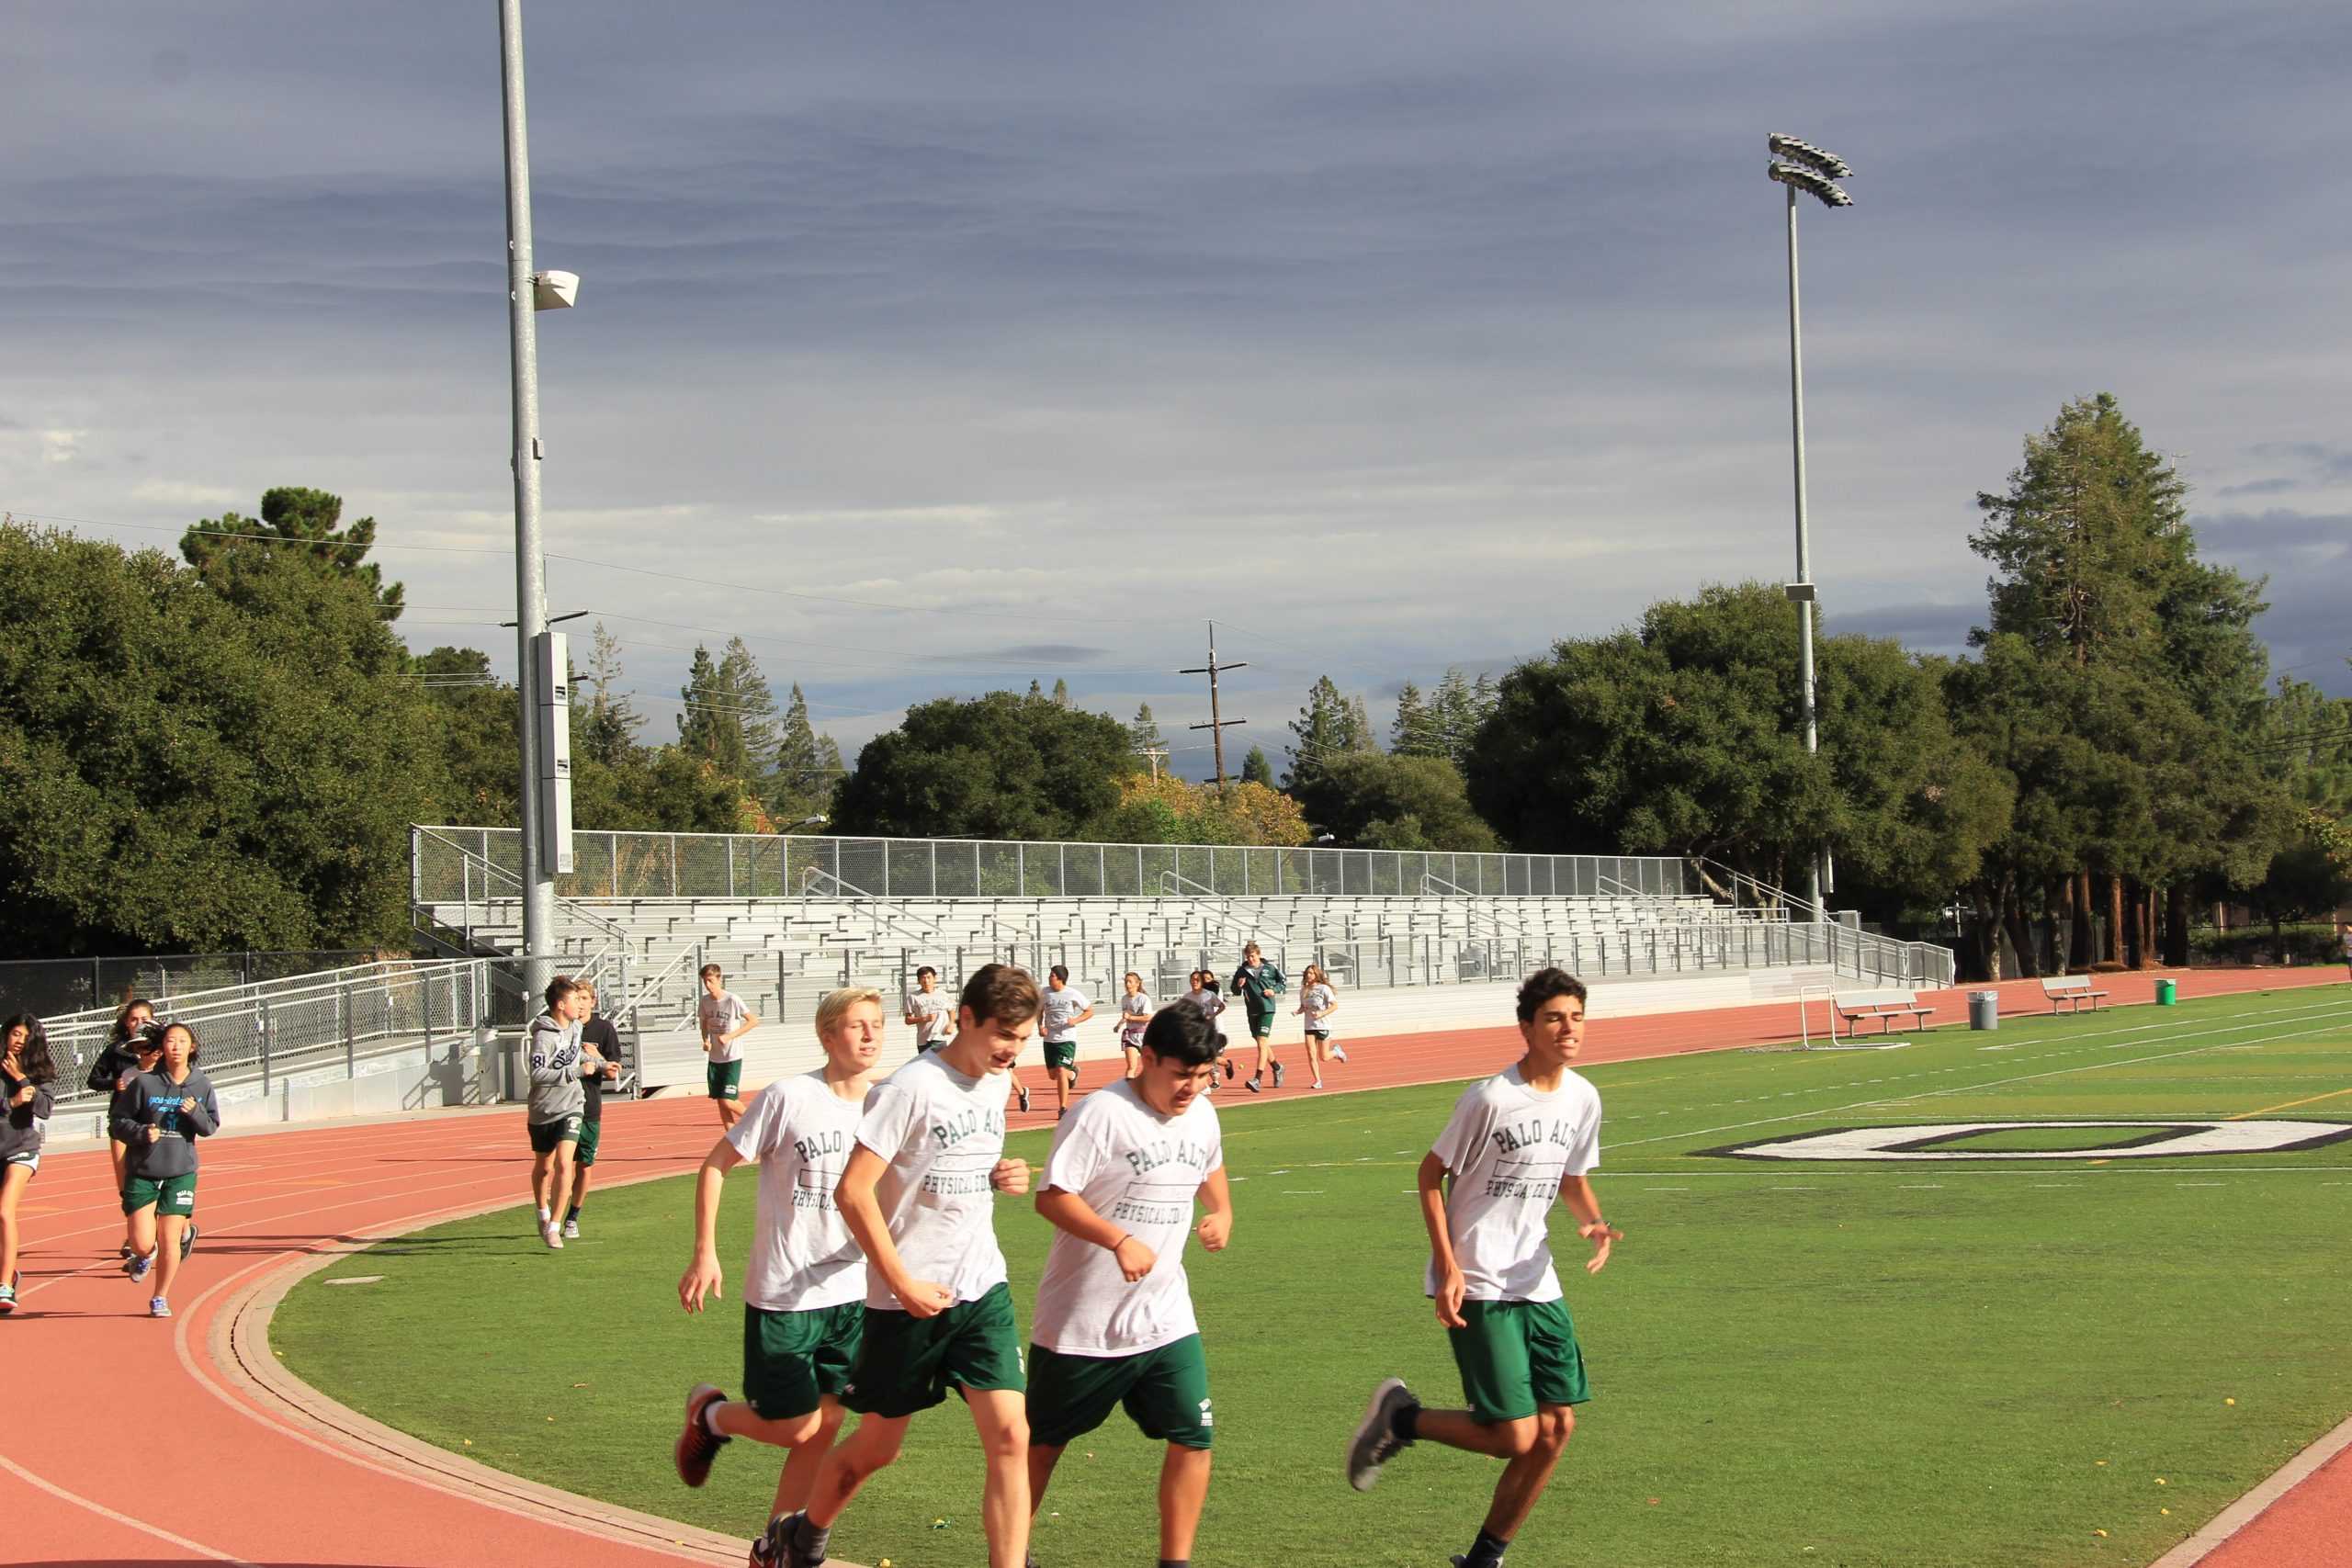 Opinion: Paly’s Physical Education program due for reevaluation